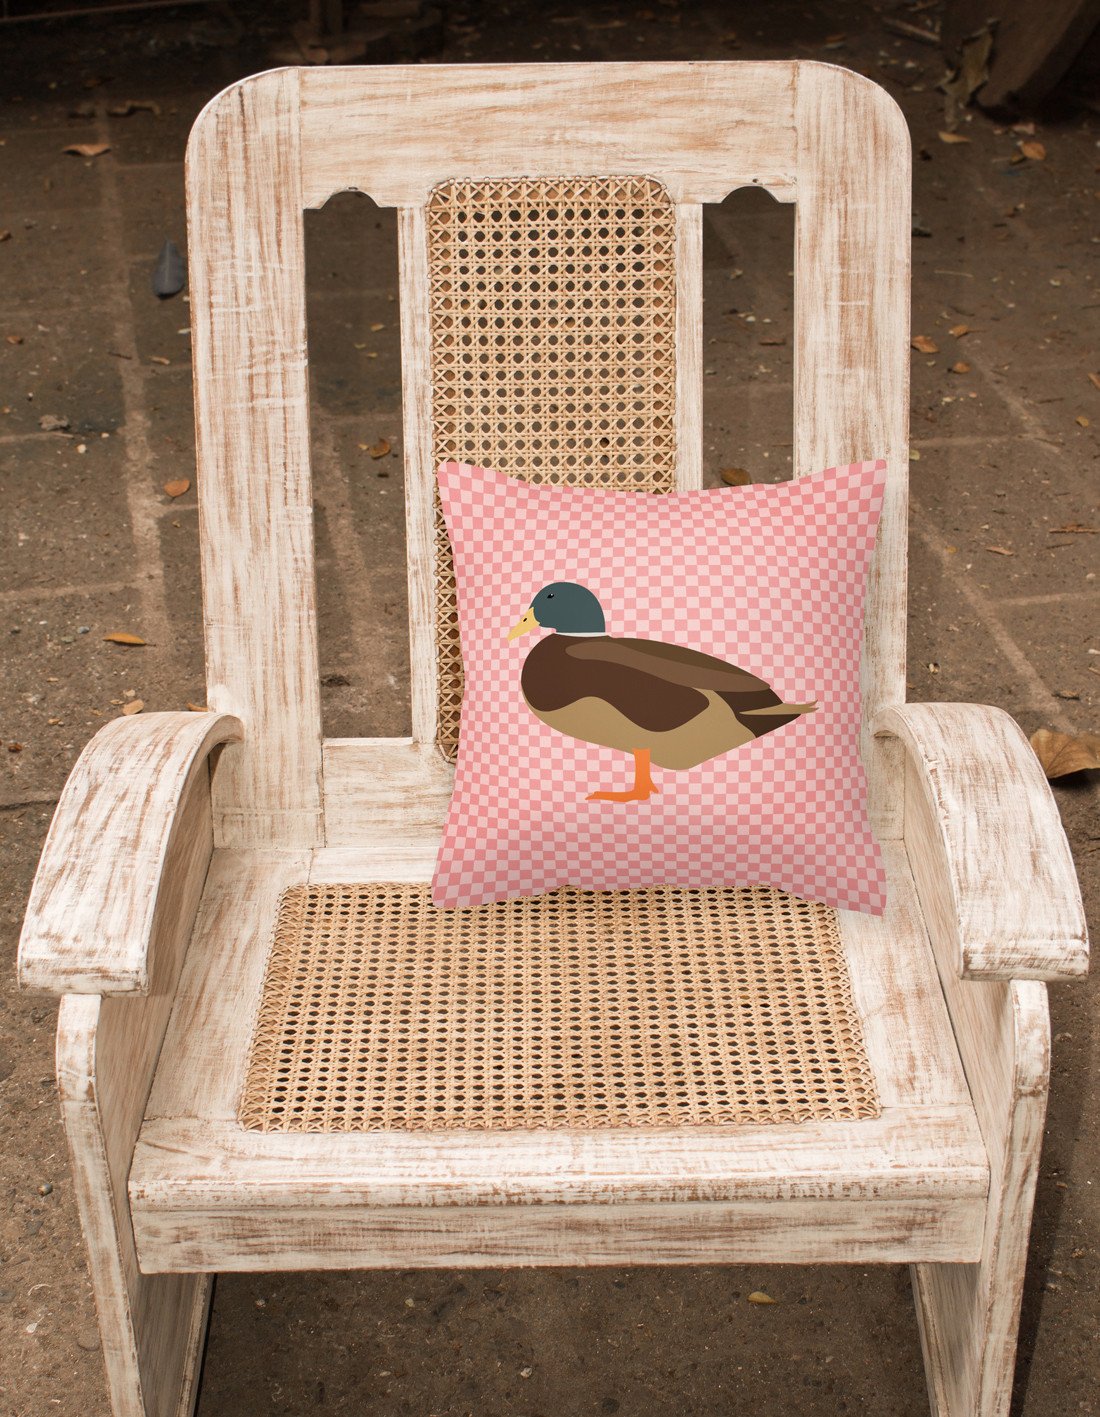 Silver Bantam Duck Pink Check Fabric Decorative Pillow BB7867PW1818 by Caroline's Treasures